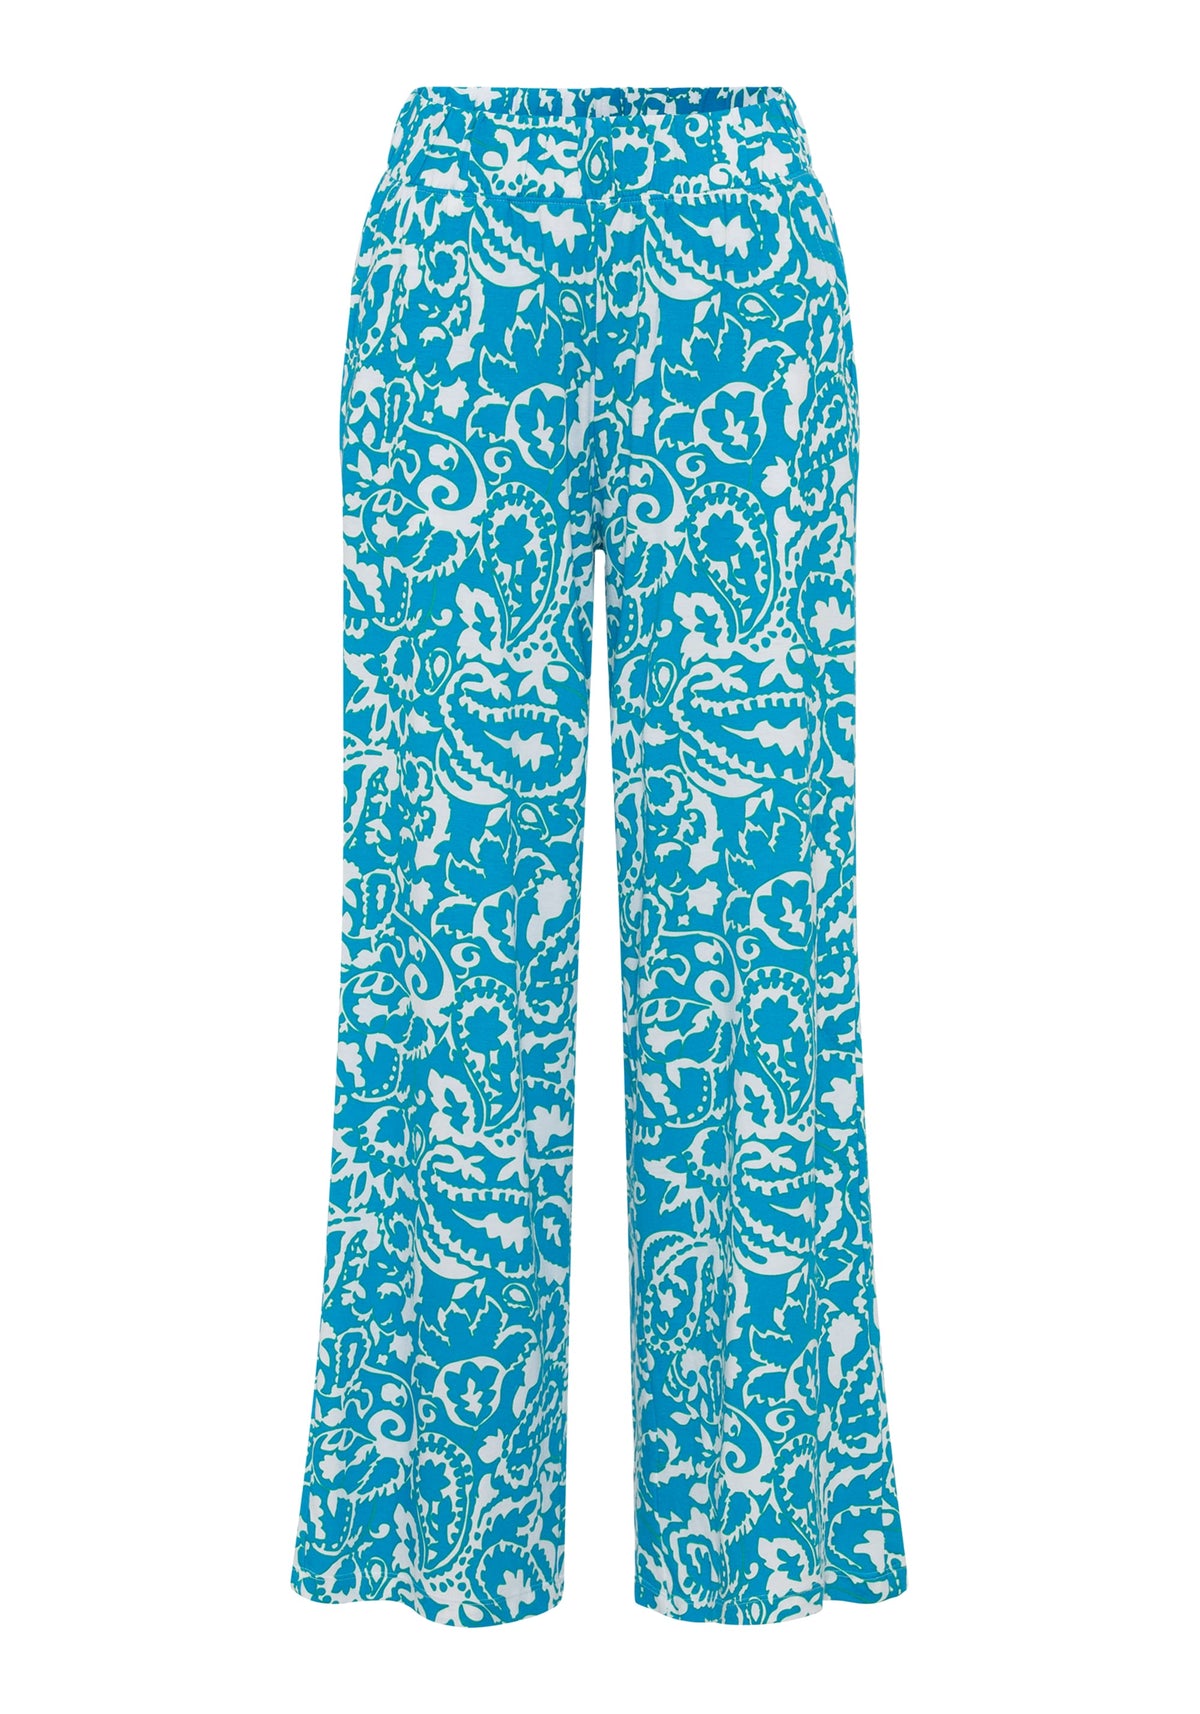 Anna Fit Wide Leg Pull-On Paisley Pant containing TENCEL™ Modal